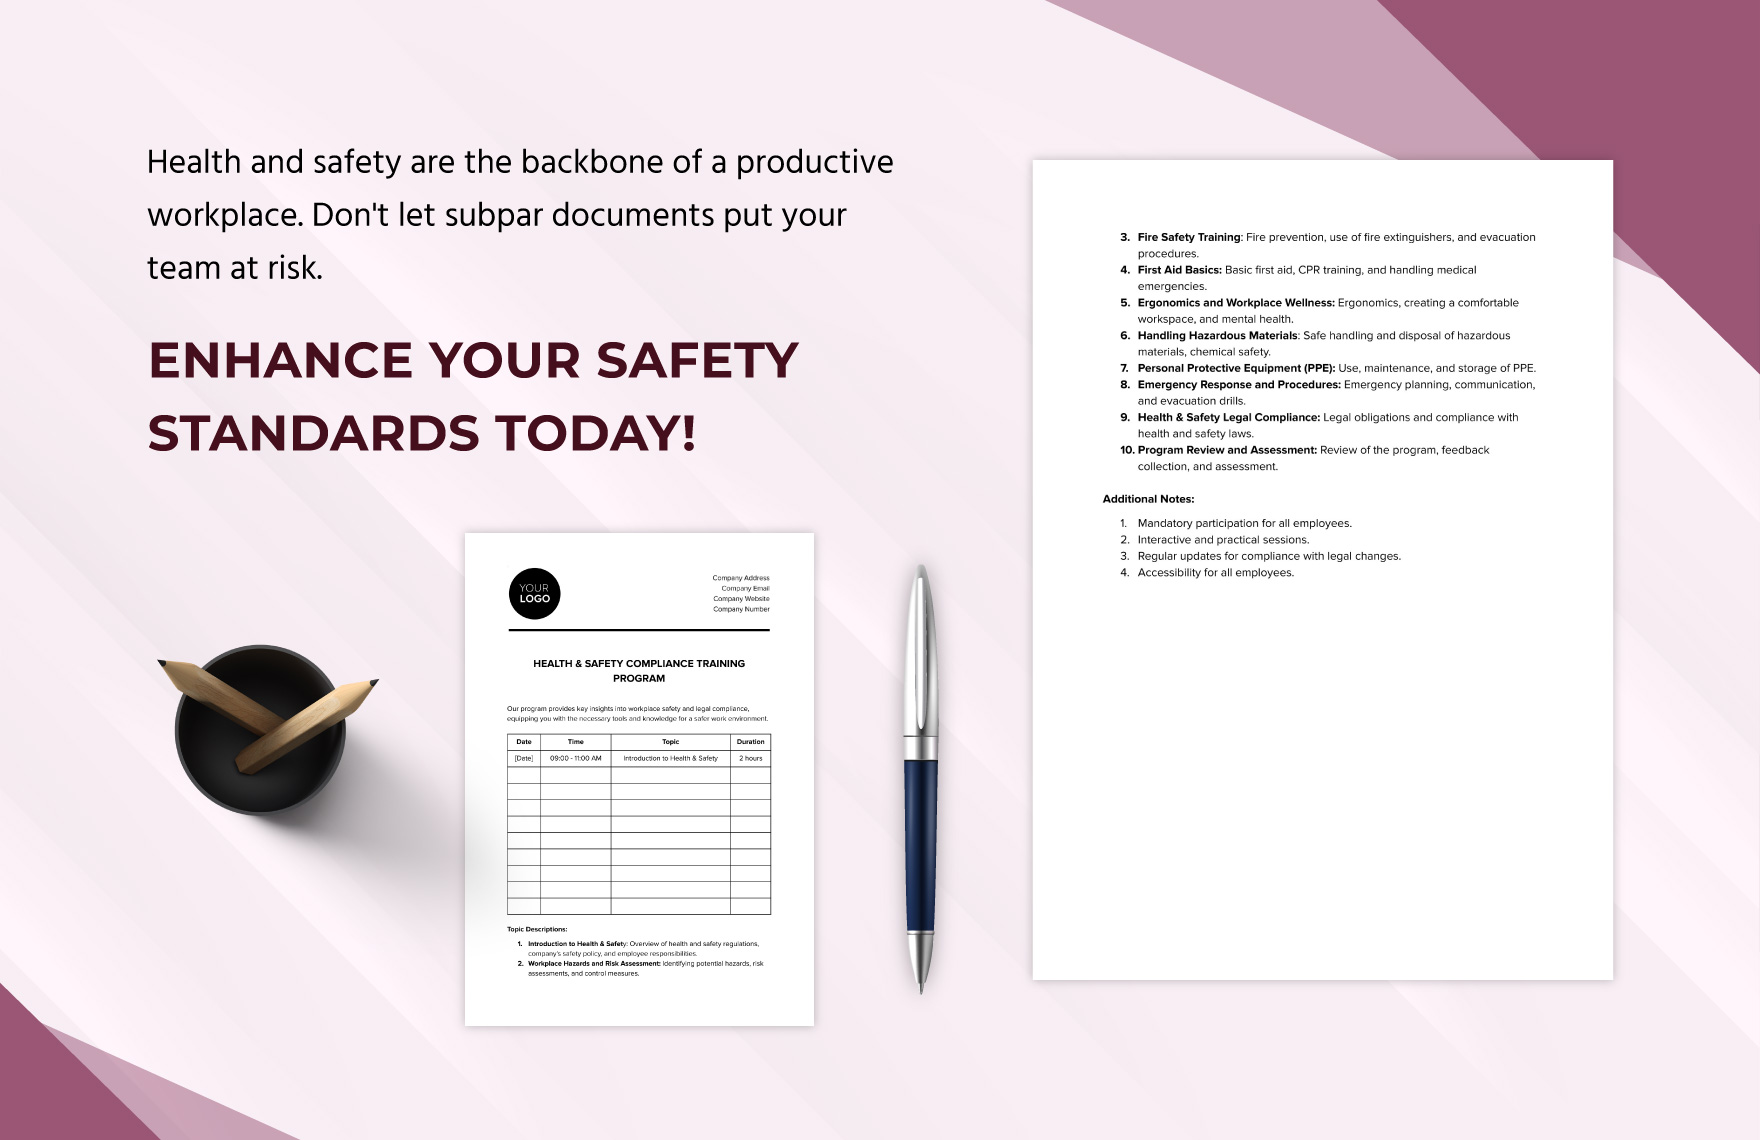 Health & Safety Compliance Training Program Template